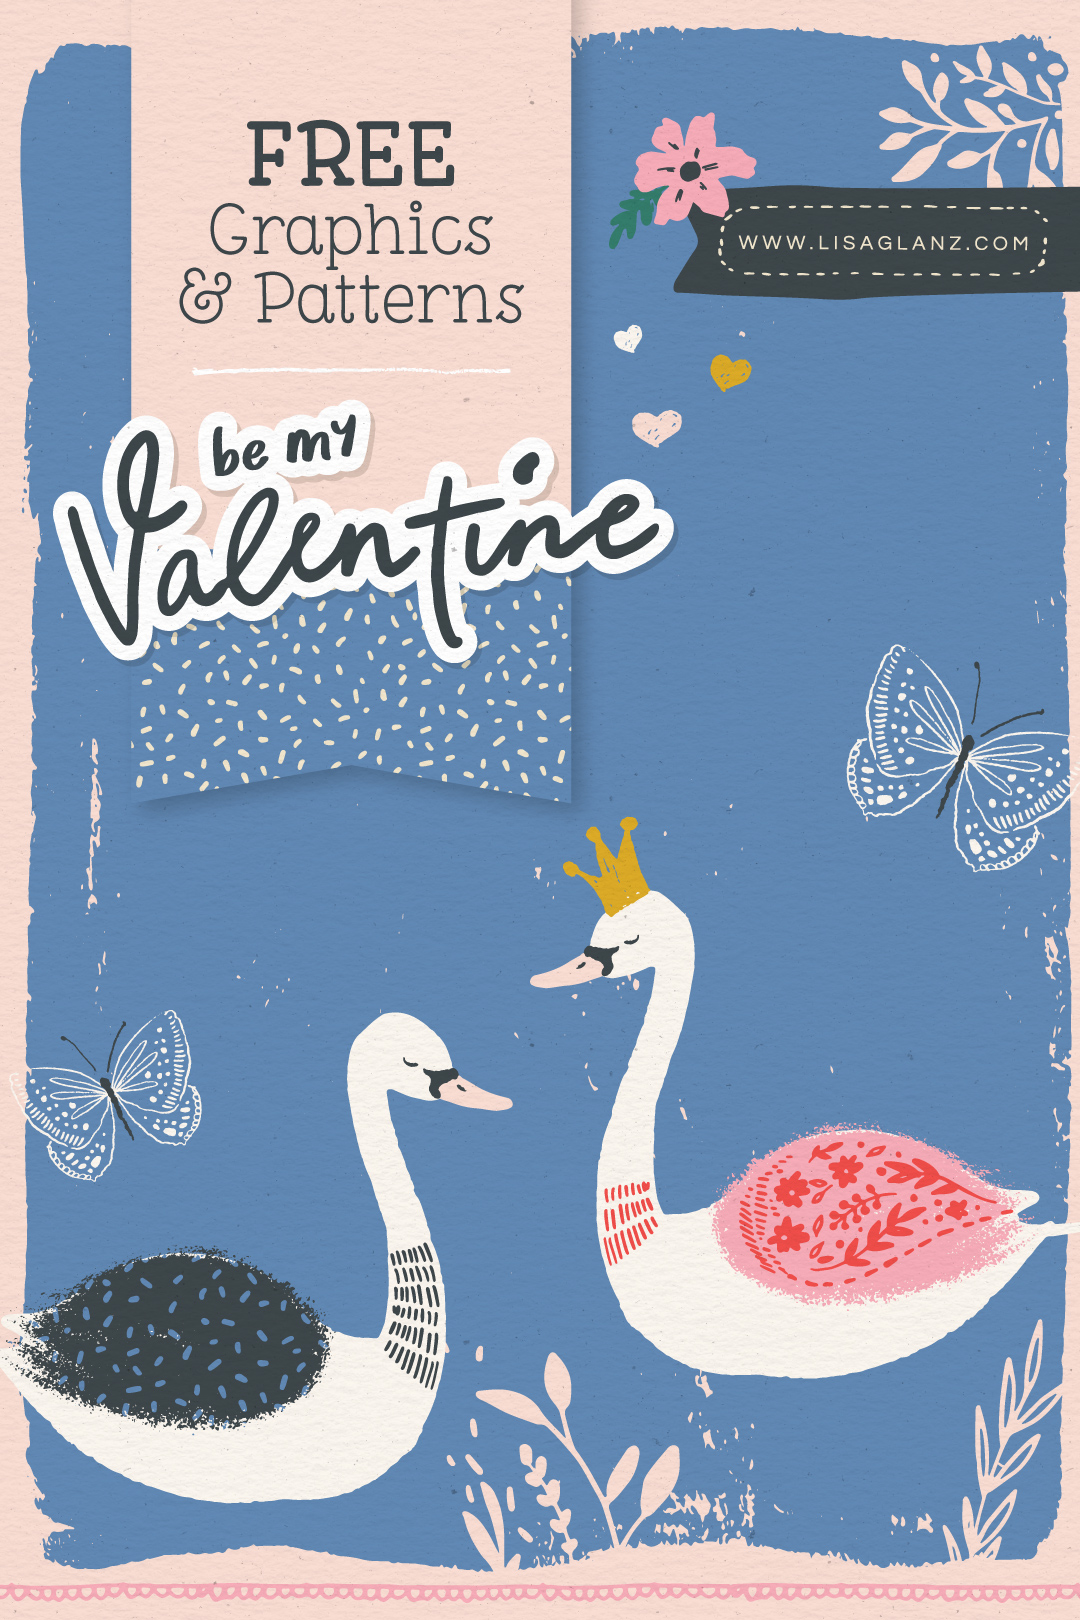 Free Valentine’s Day graphics and patterns!